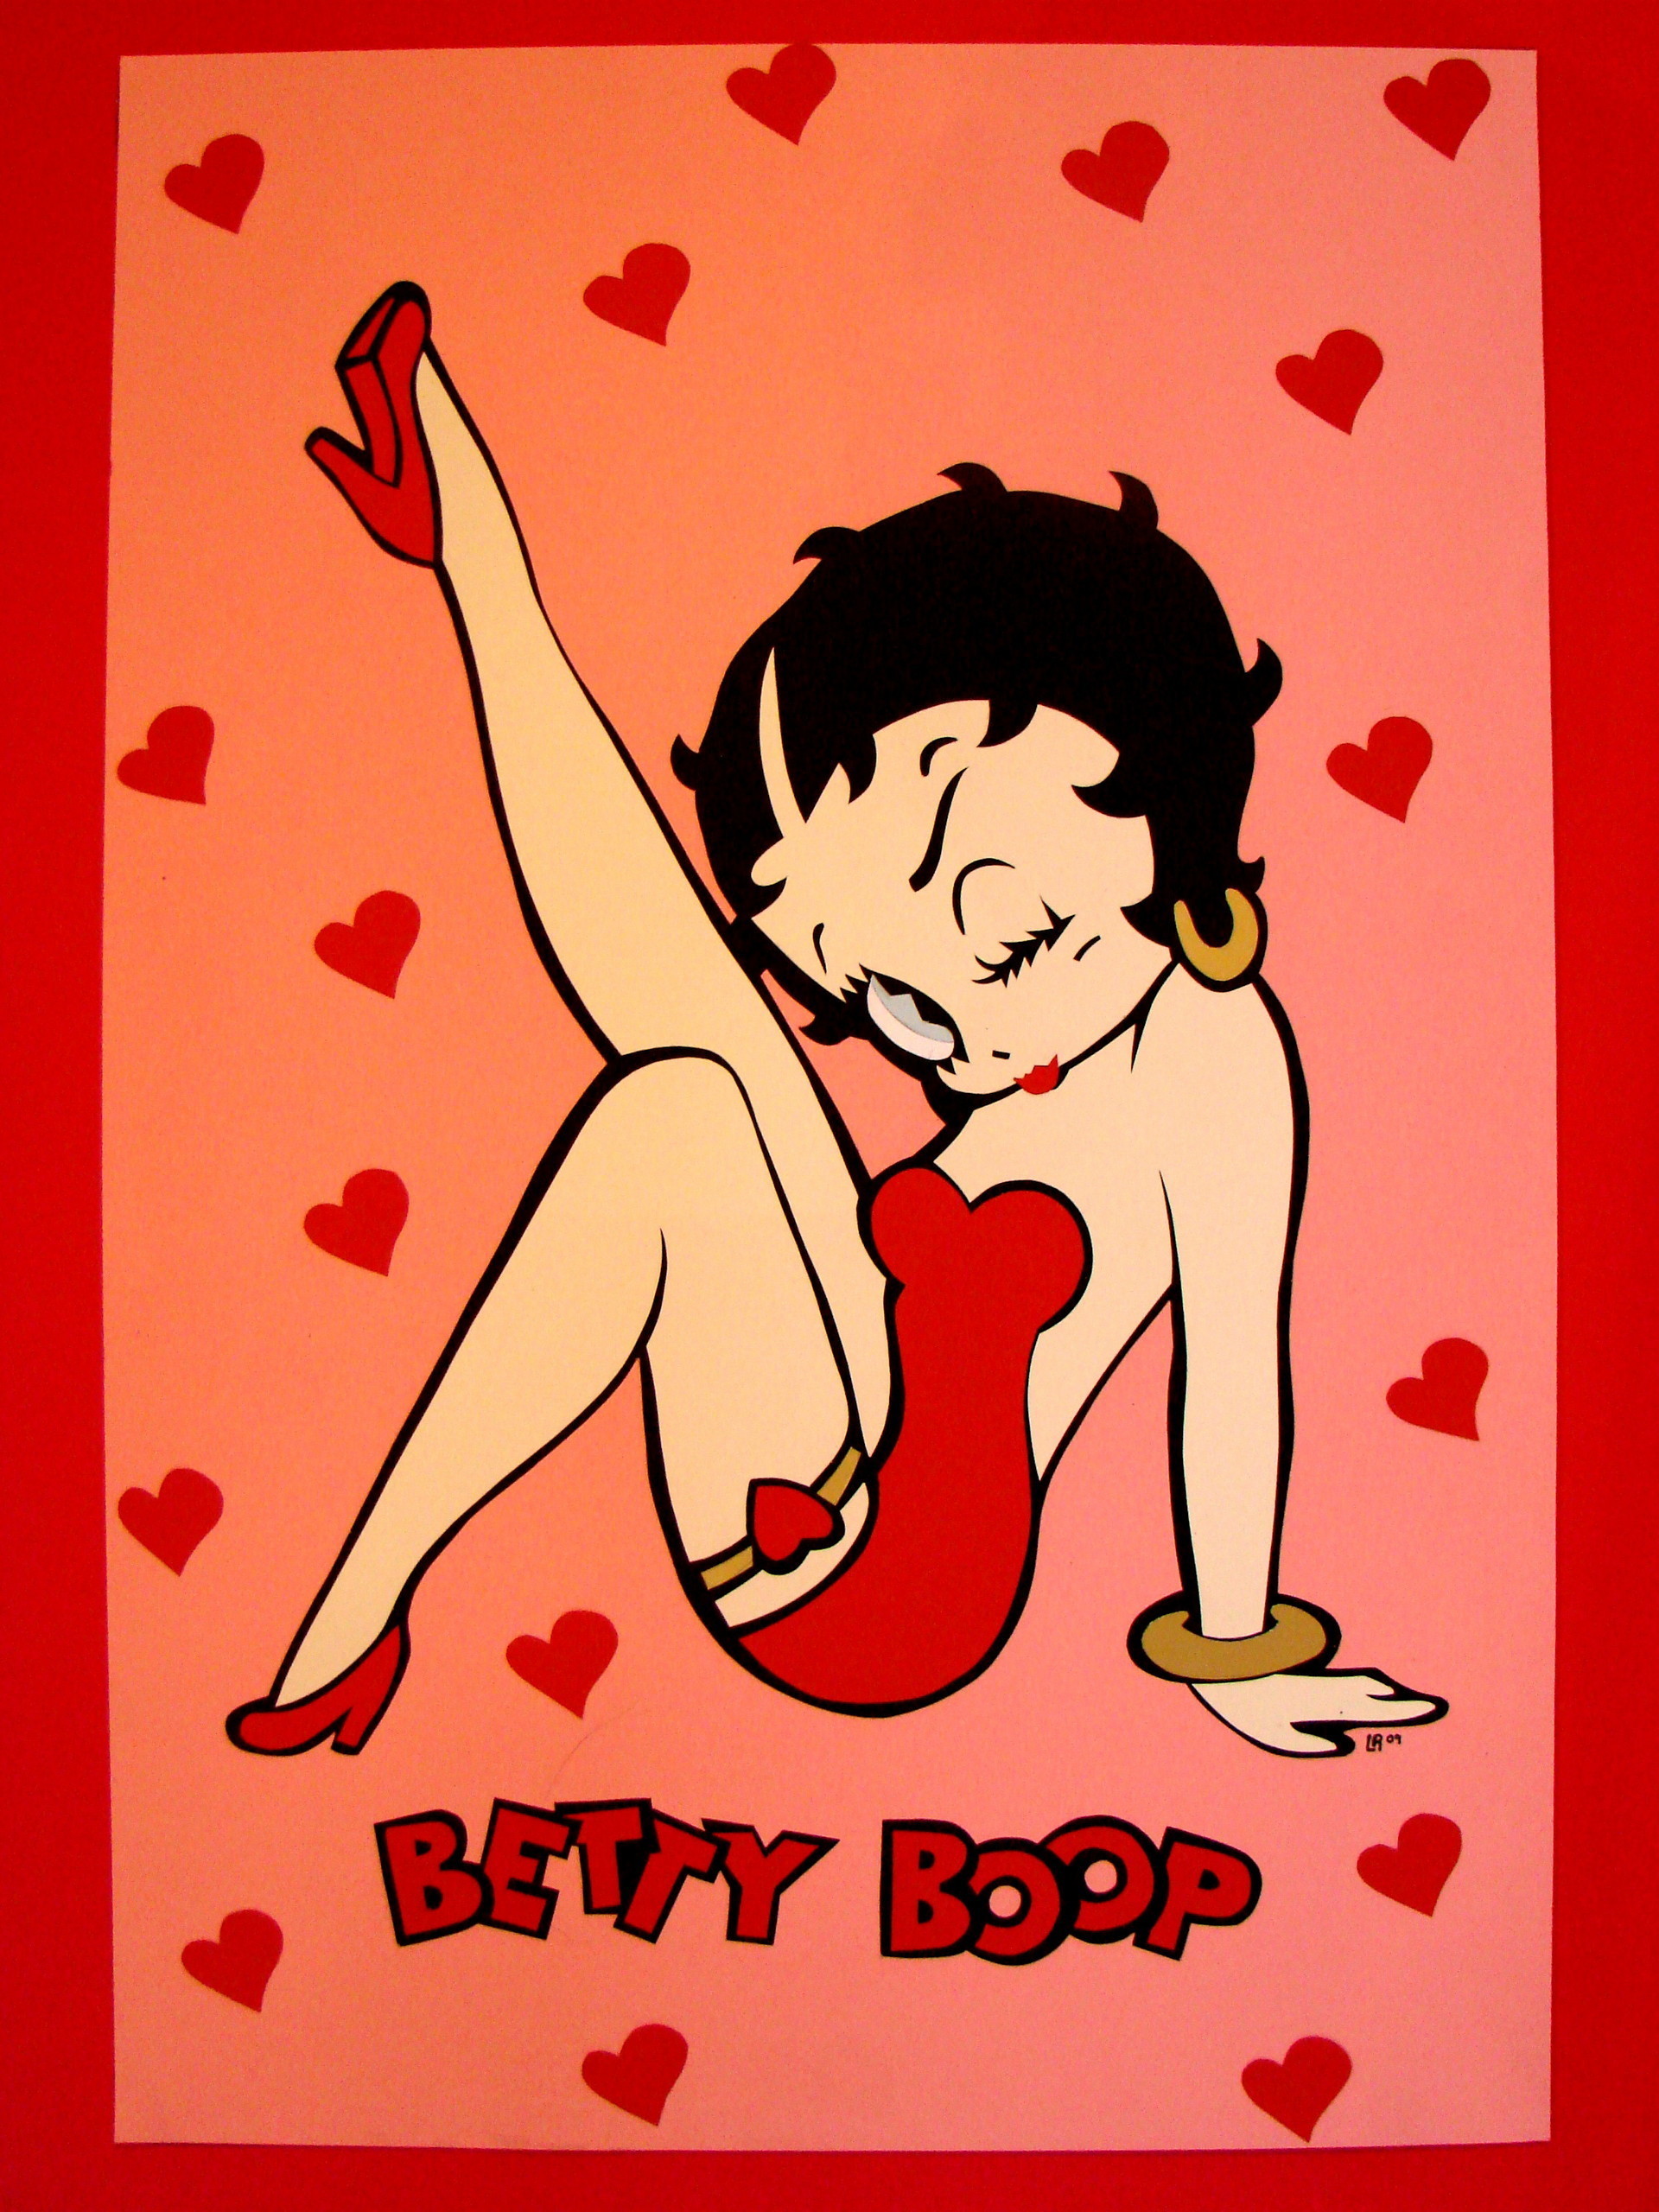 1920x2560  HD Wallpaper and background photos of Betty Boop for fans of Betty  Boop images.